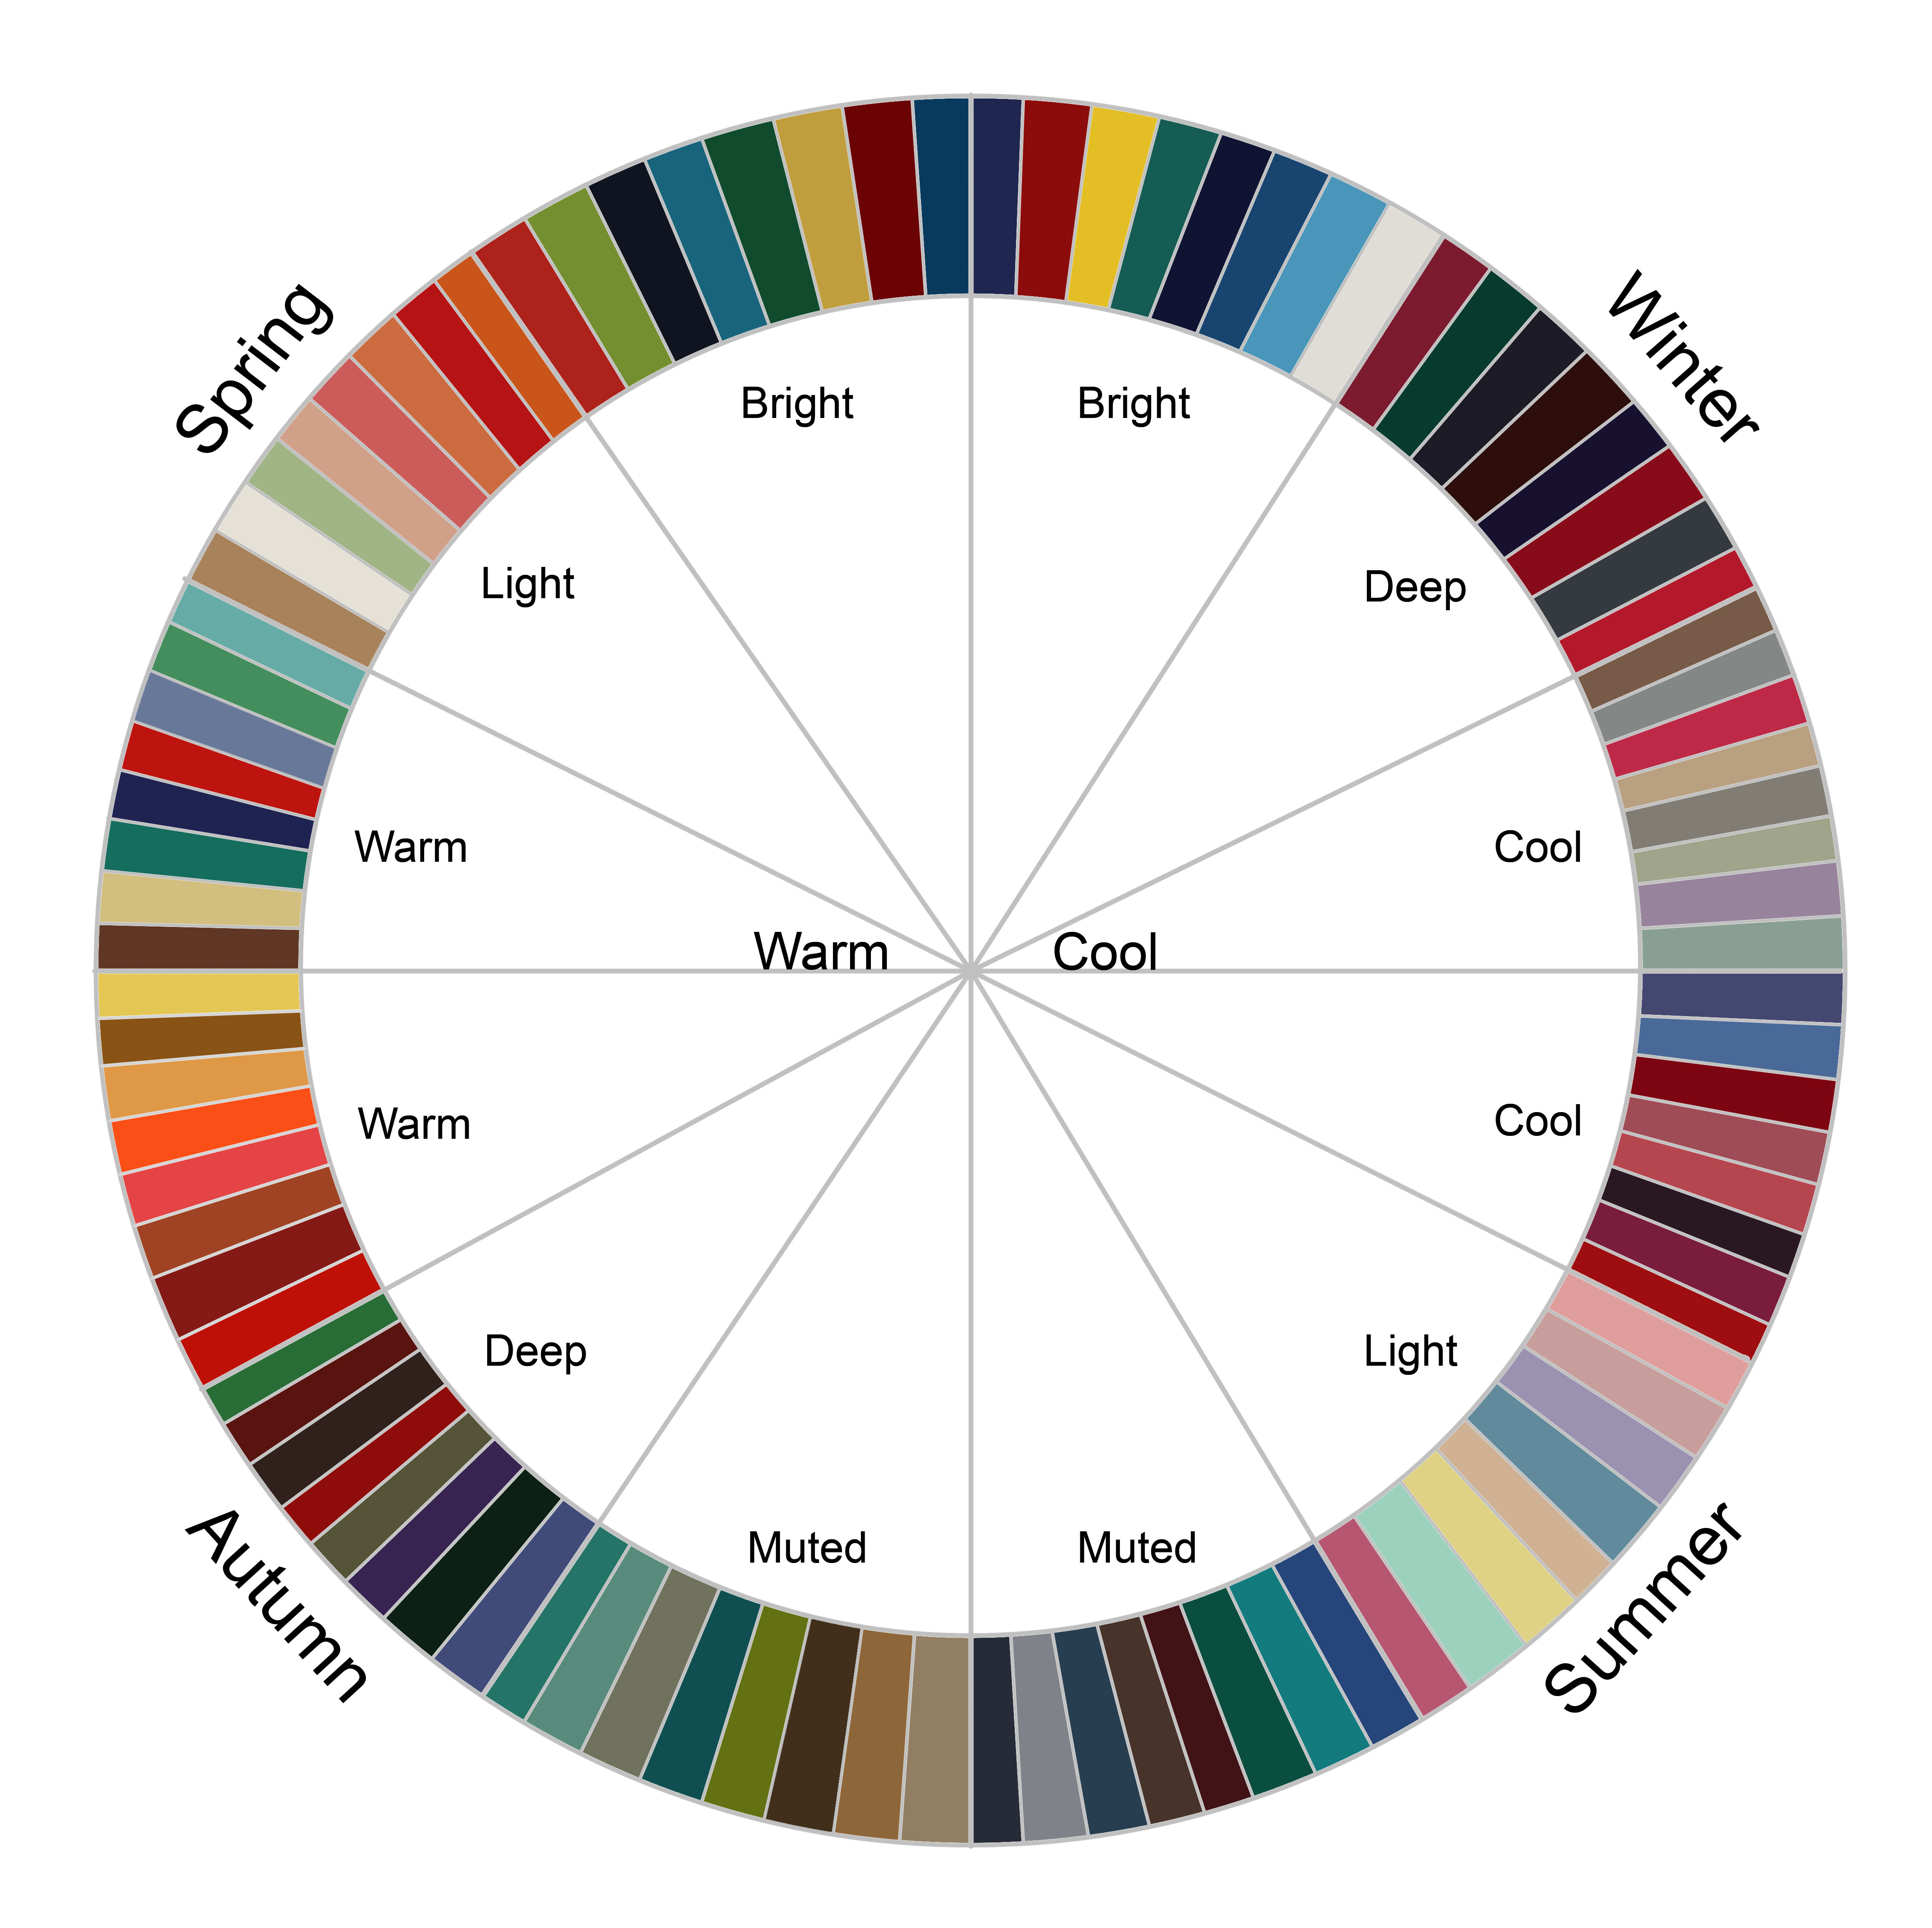 How to choose a colour theme for effective graphic design| MAAC blog